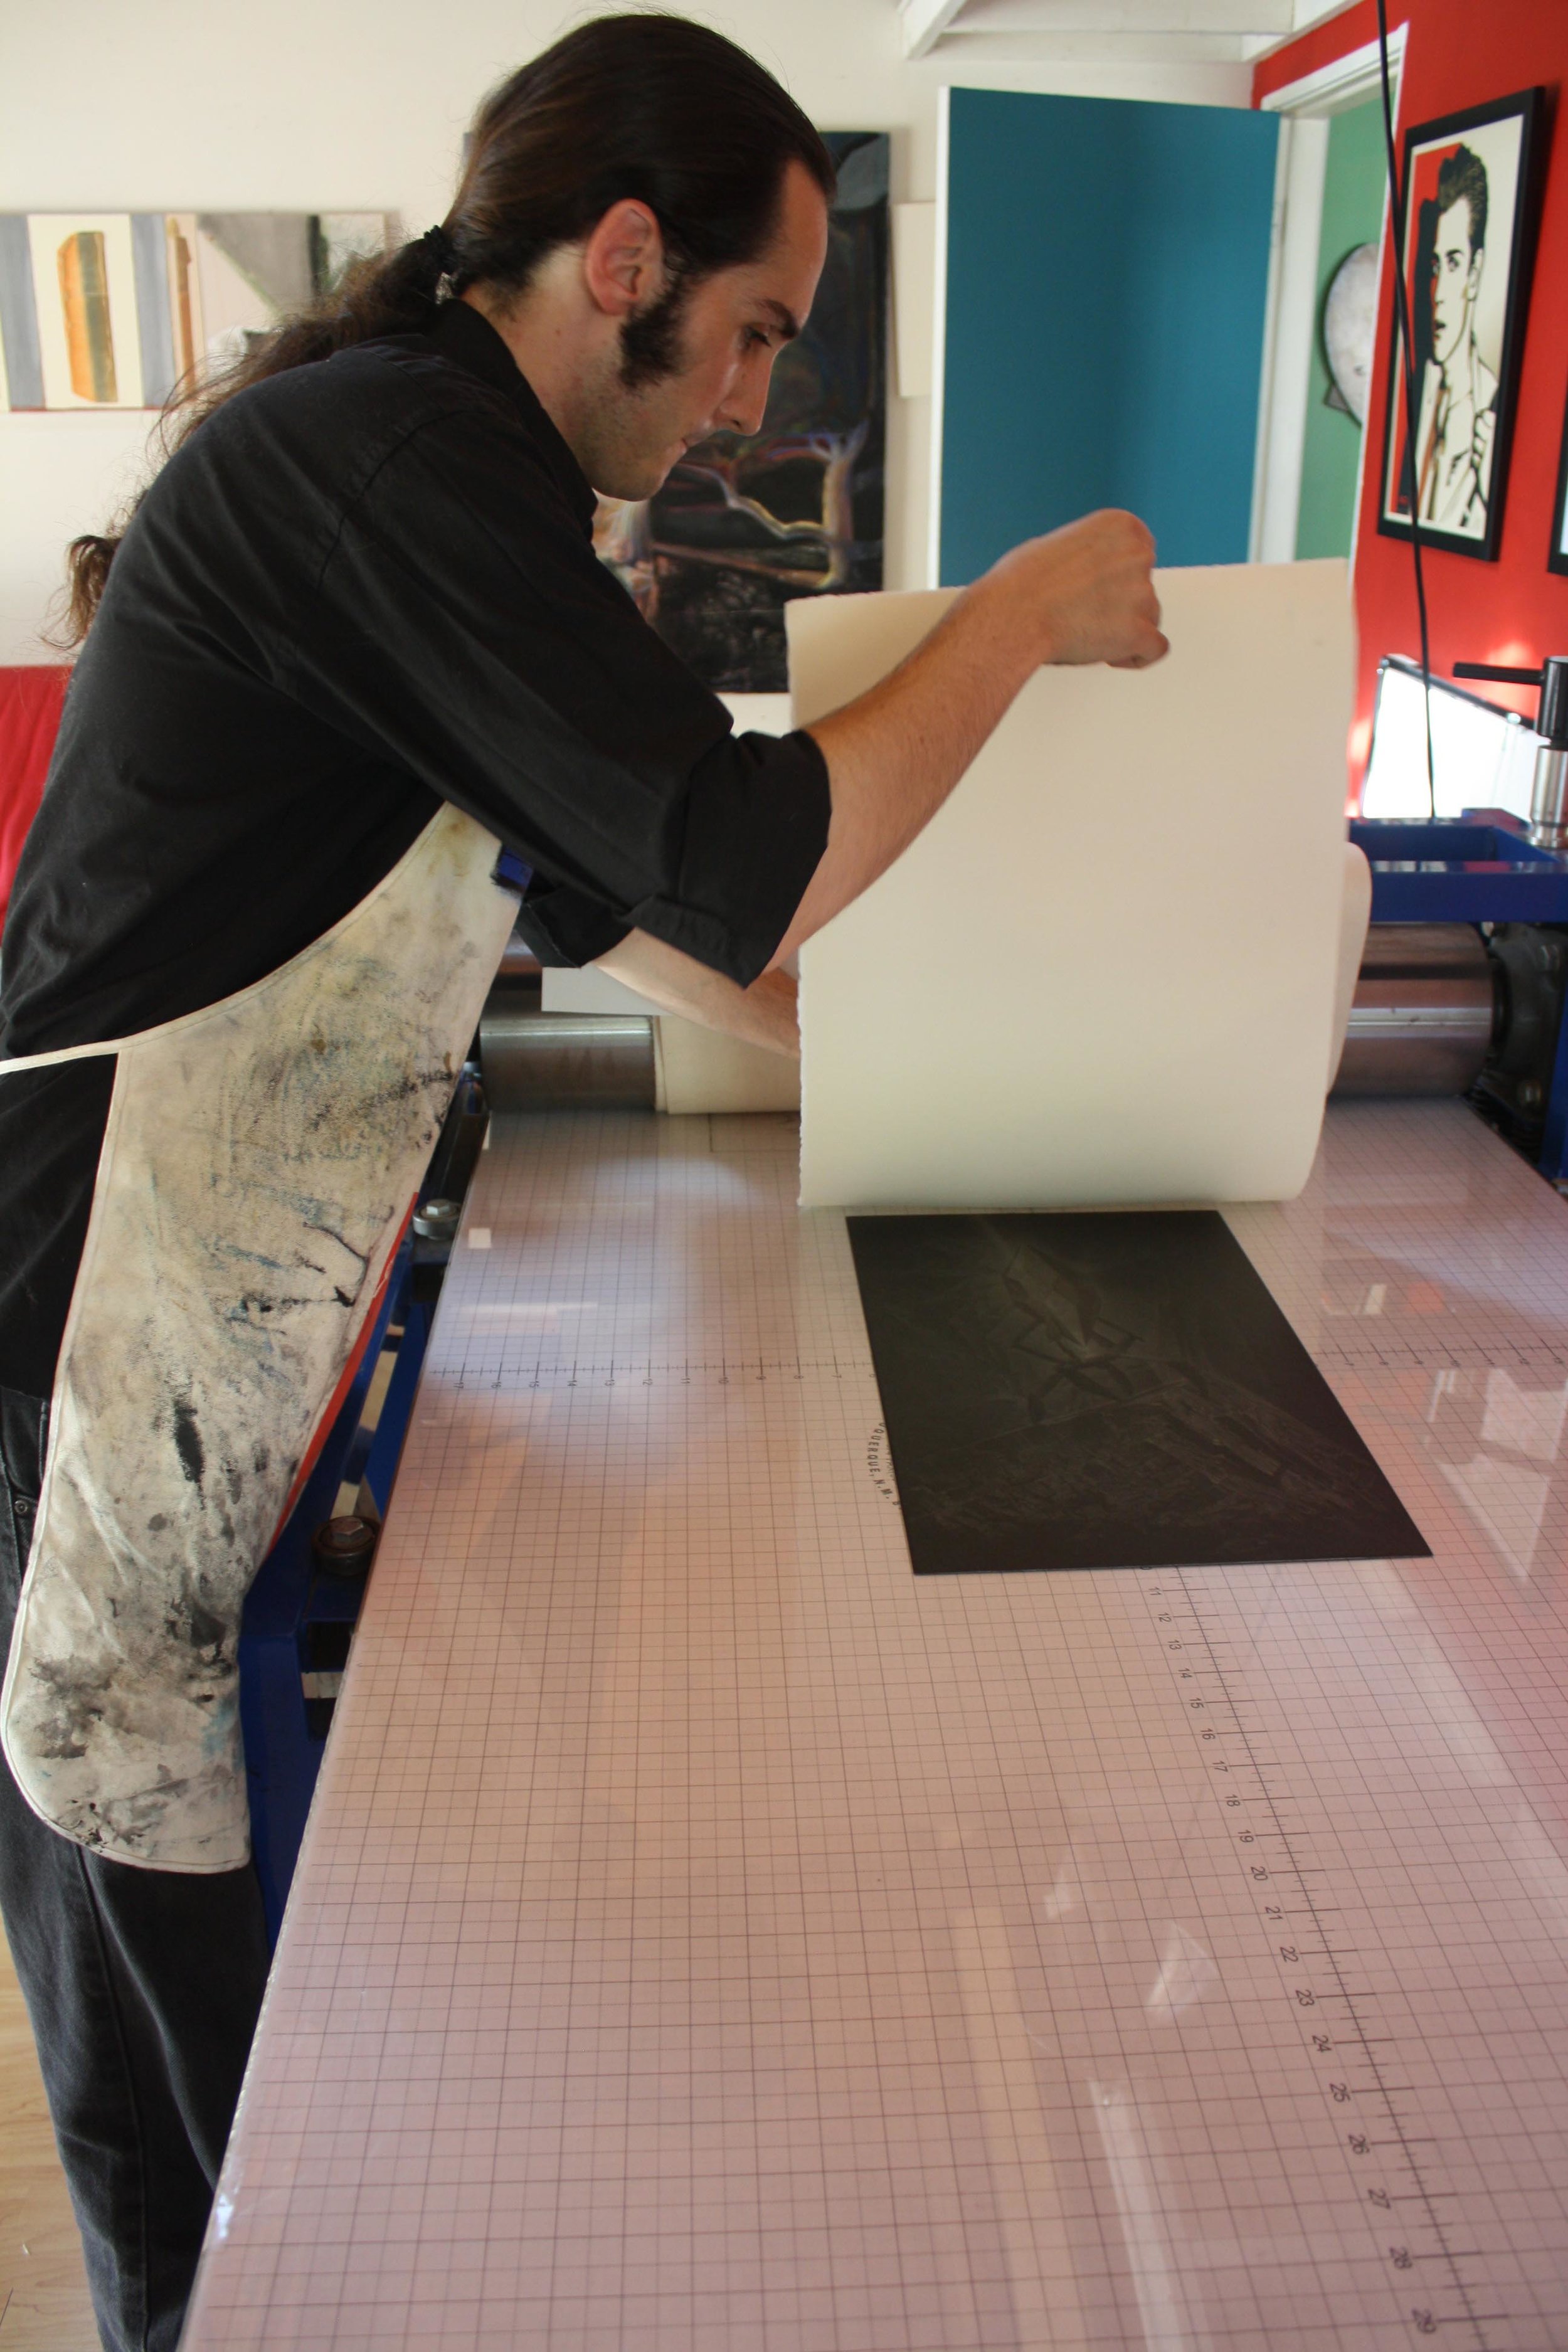 Artist-in-Residence Douglas Bosley Printing His Etching "LD:4334.0003" - Summer 2014